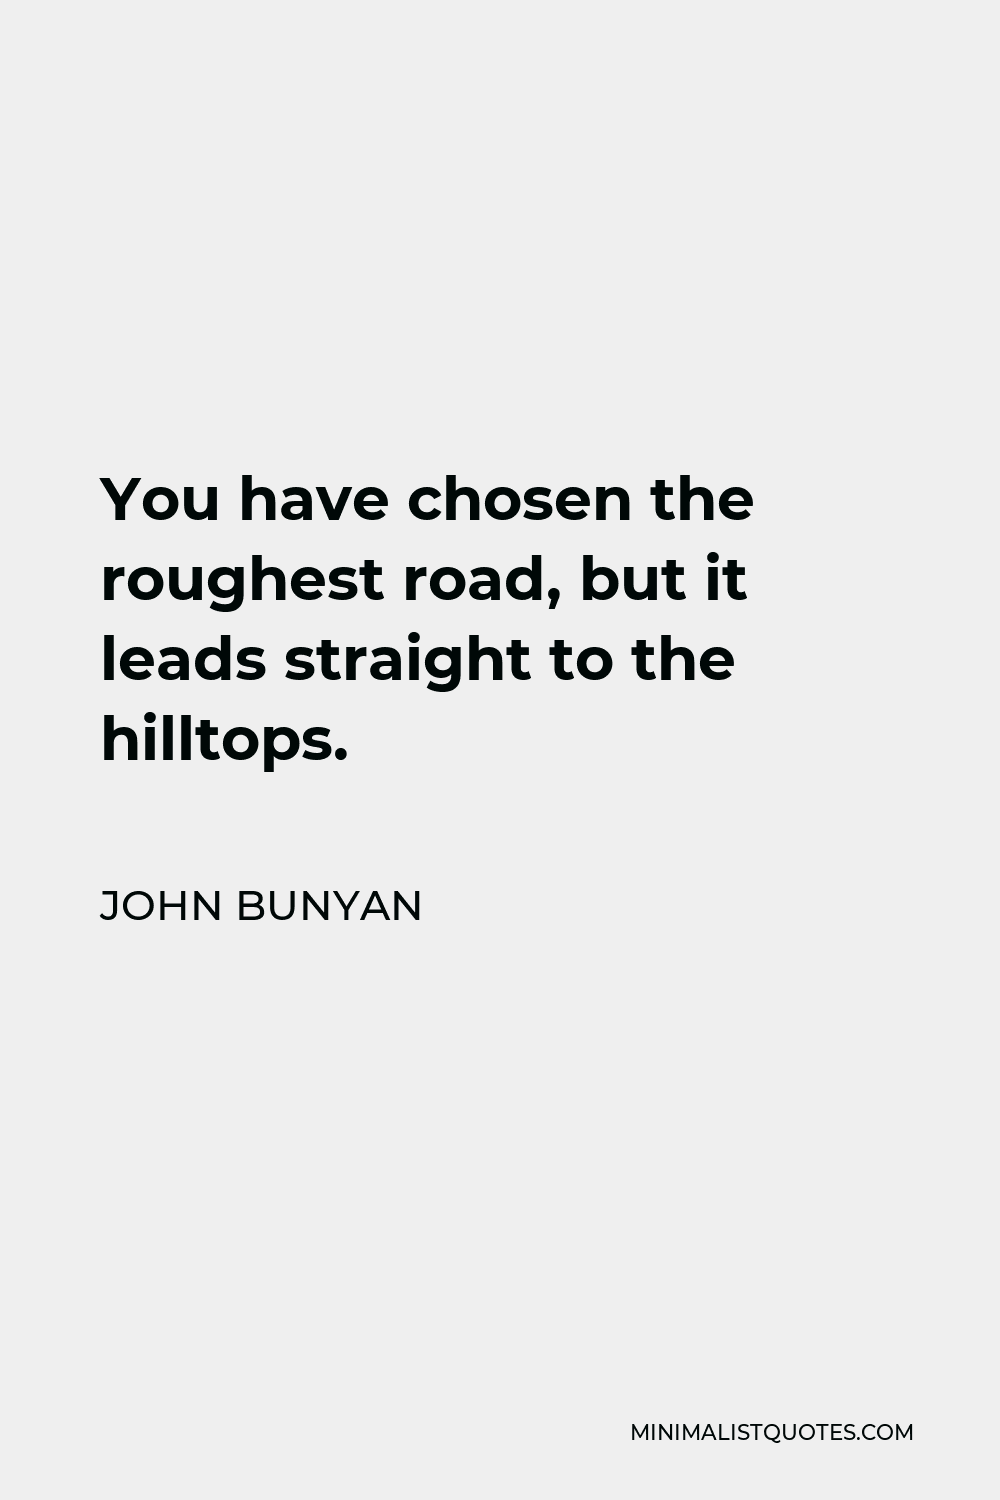 John Bunyan Quote - You have chosen the roughest road, but it leads straight to the hilltops.